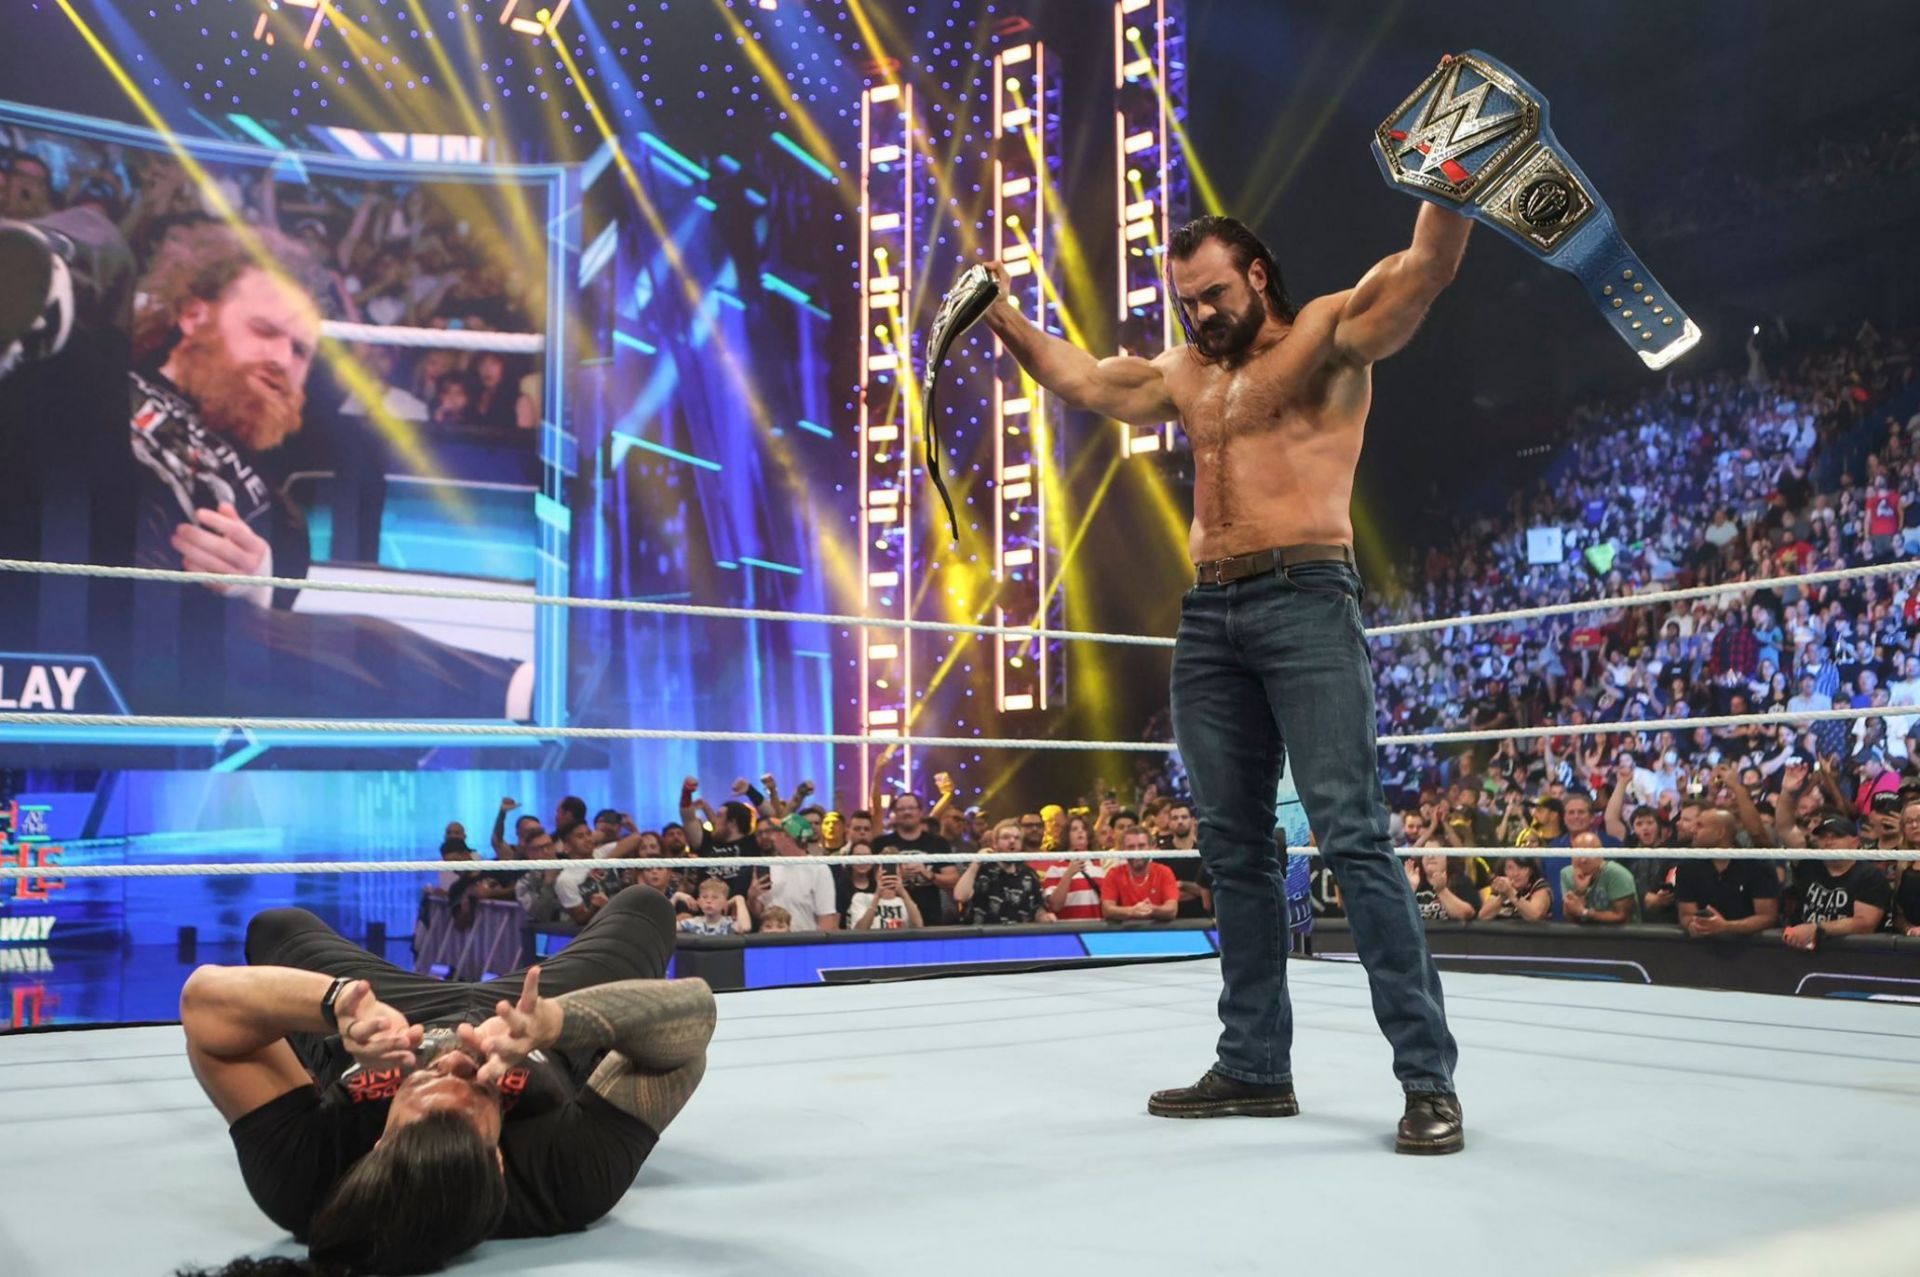 Drew McIntyre laid out Roman Reigns to close out SmackDown